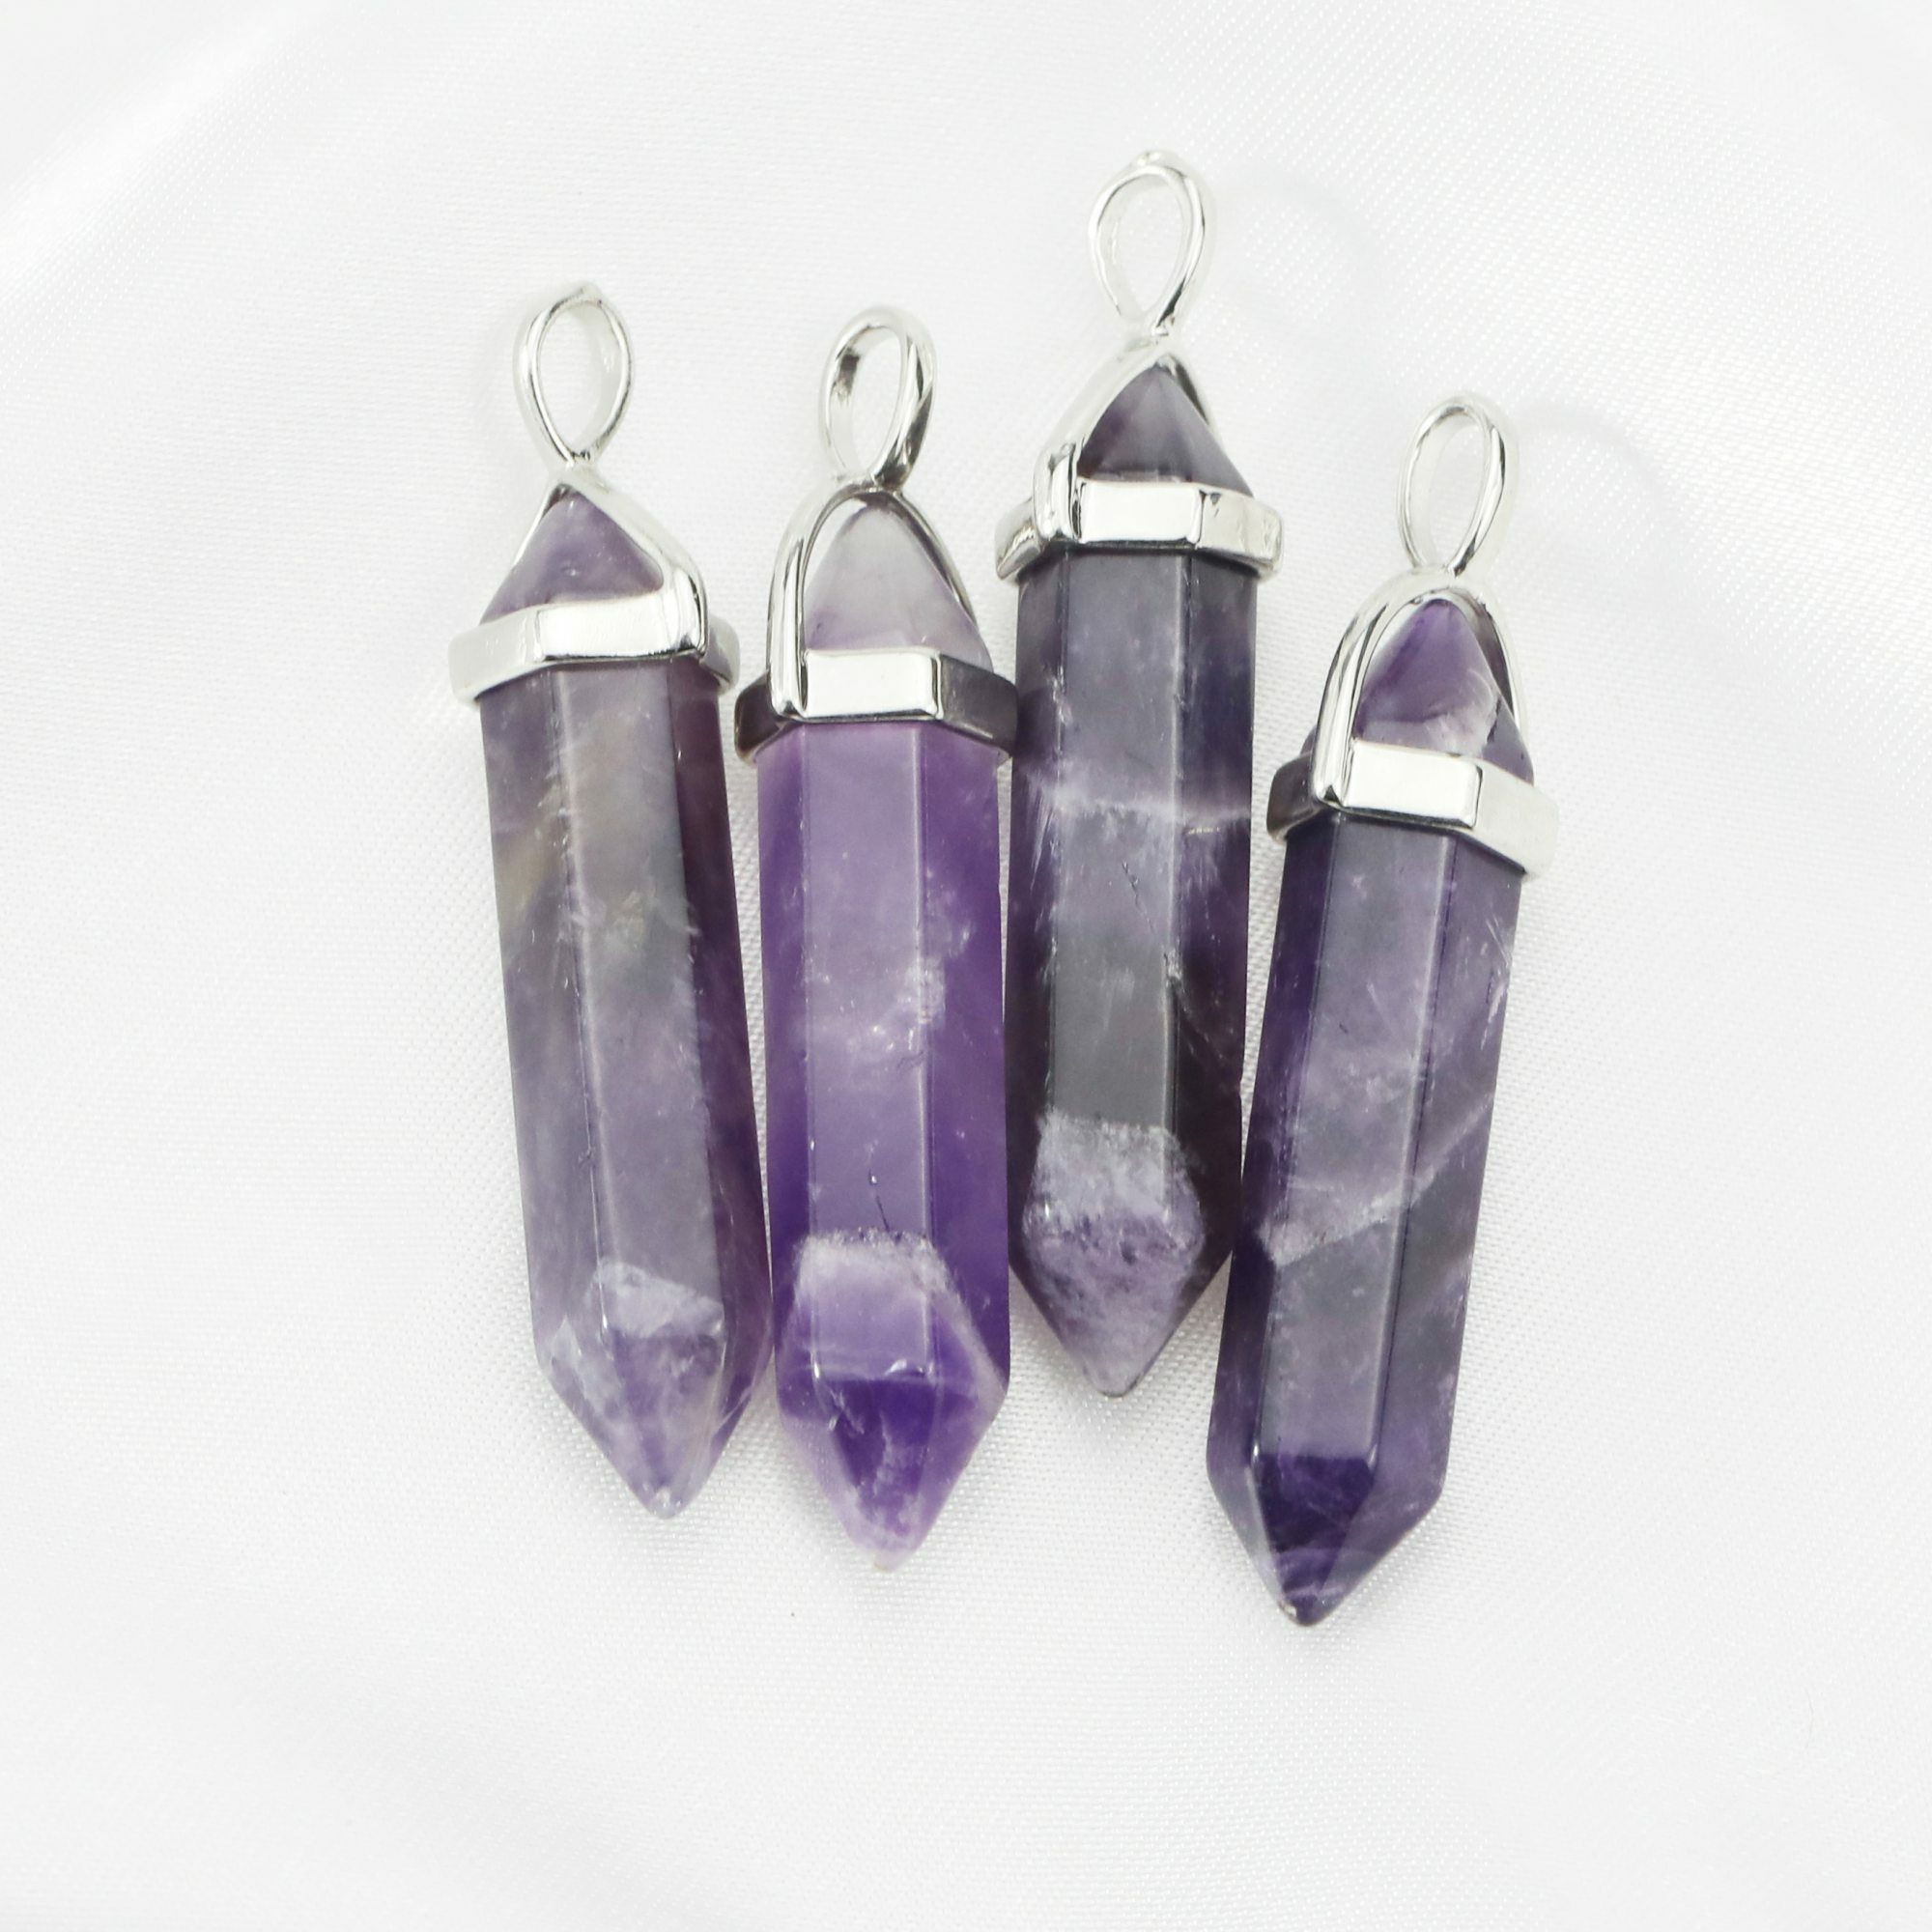 5Pcs 10x40mm Nature Amethyst Pillar Pendant Charm Stone Silver Plated Brass Bail DIY Jewelry Supplies 1800526 - Click Image to Close